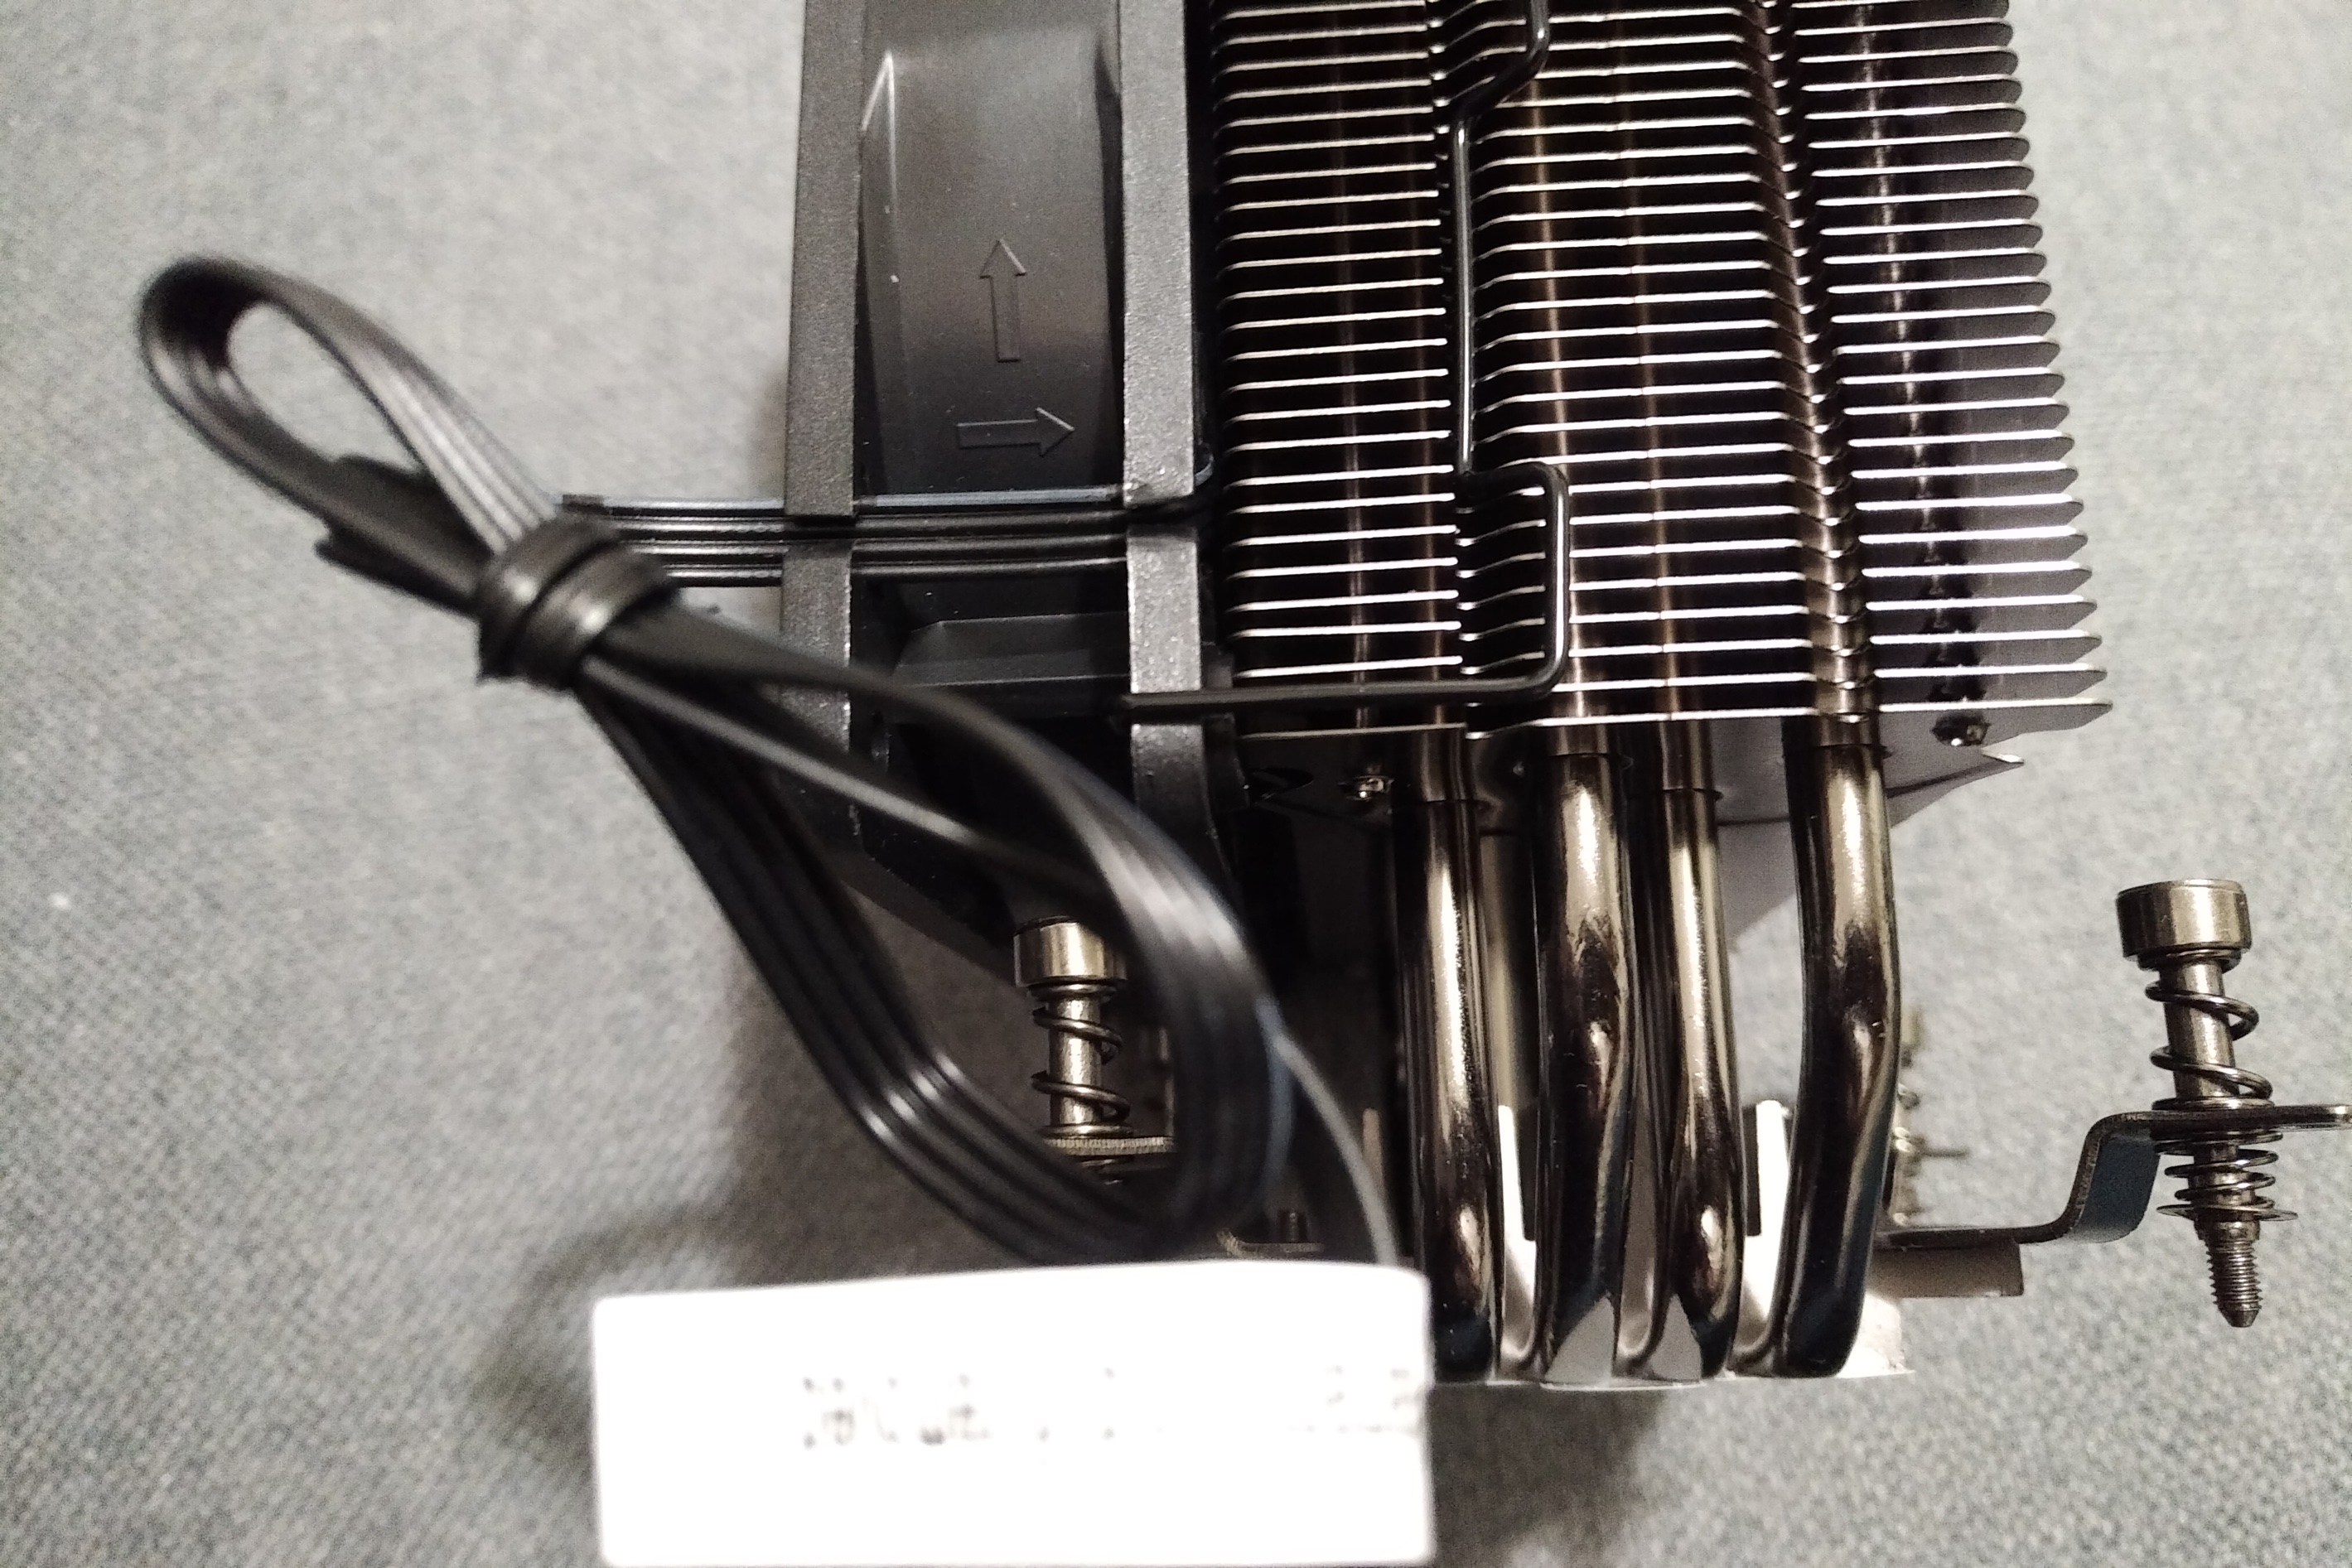 Arrows on fan indicating air flow direction